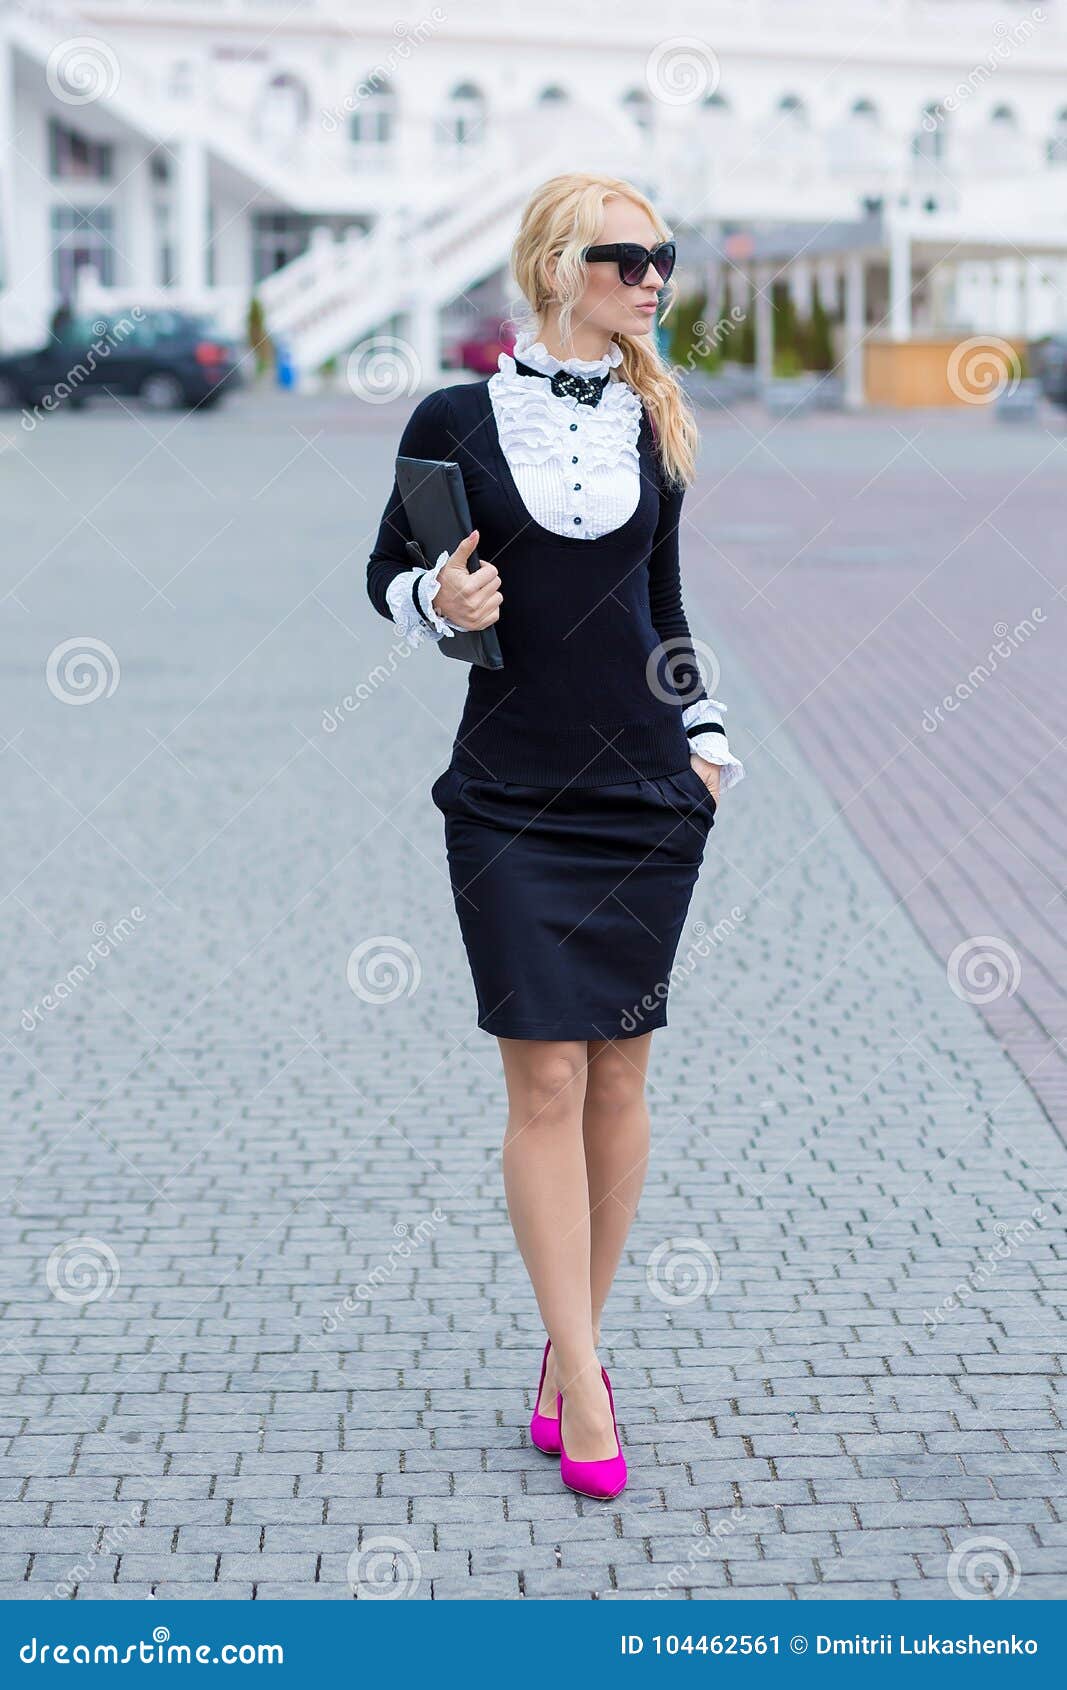 Business Lady Woman Dressed in Working Serious Skirt and Shirt Posing on Street with Note Book Blond Hairs and Pink High Heels Sex Stock Image image